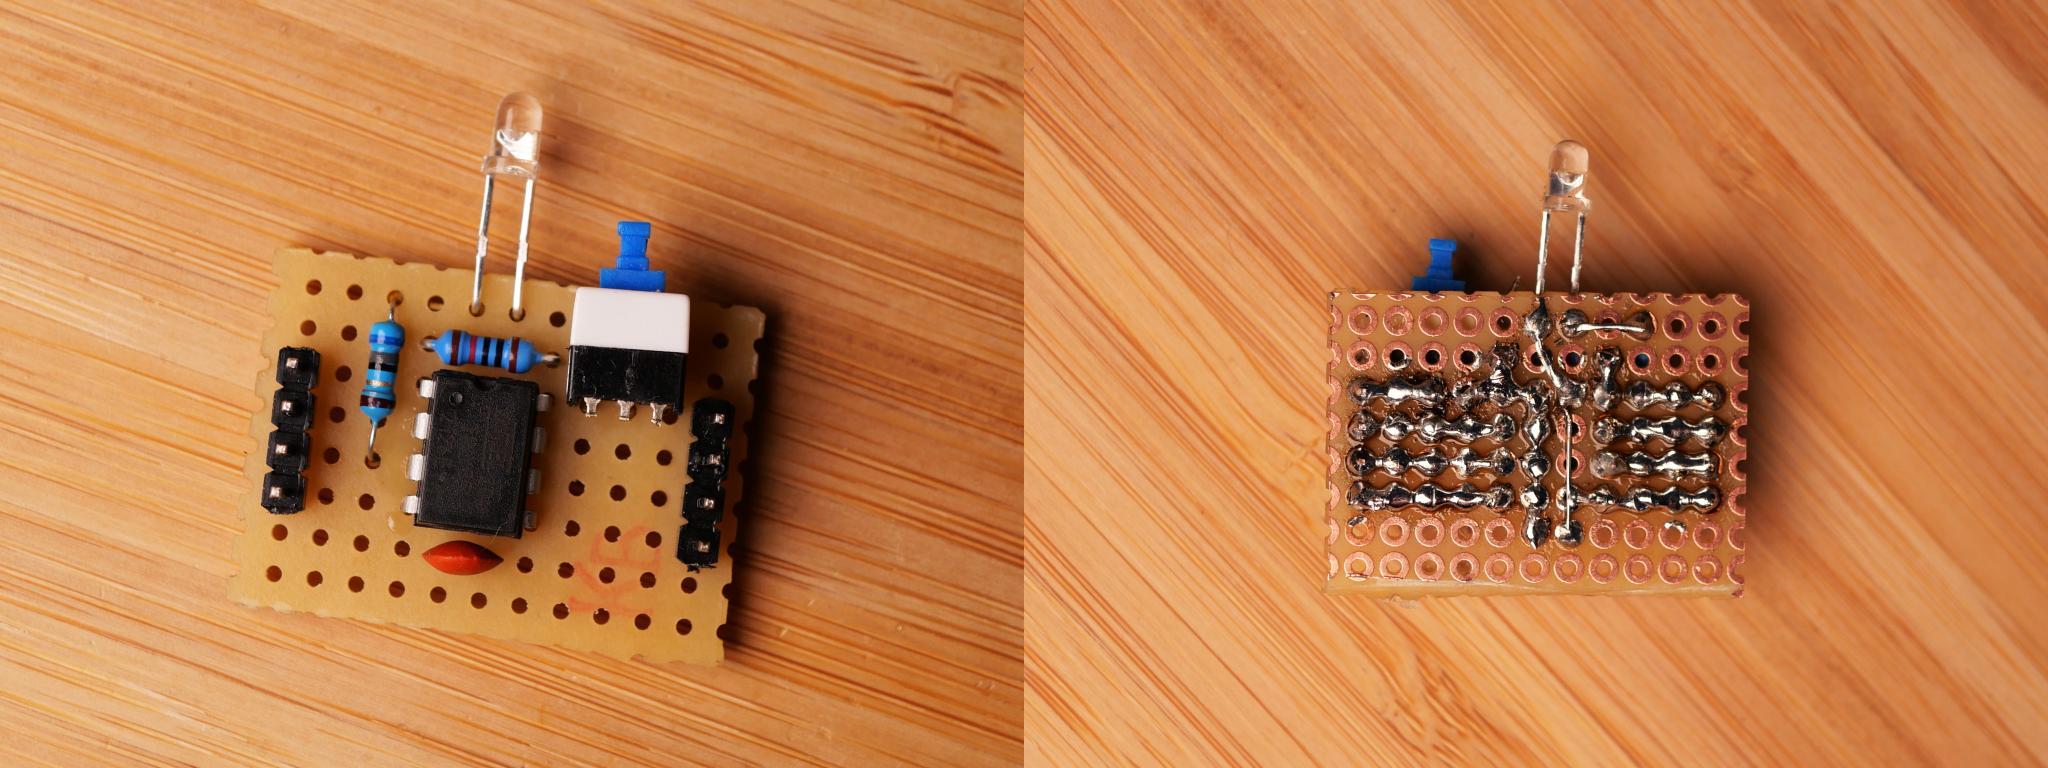 Front and back of the perfboard with the LED circuit